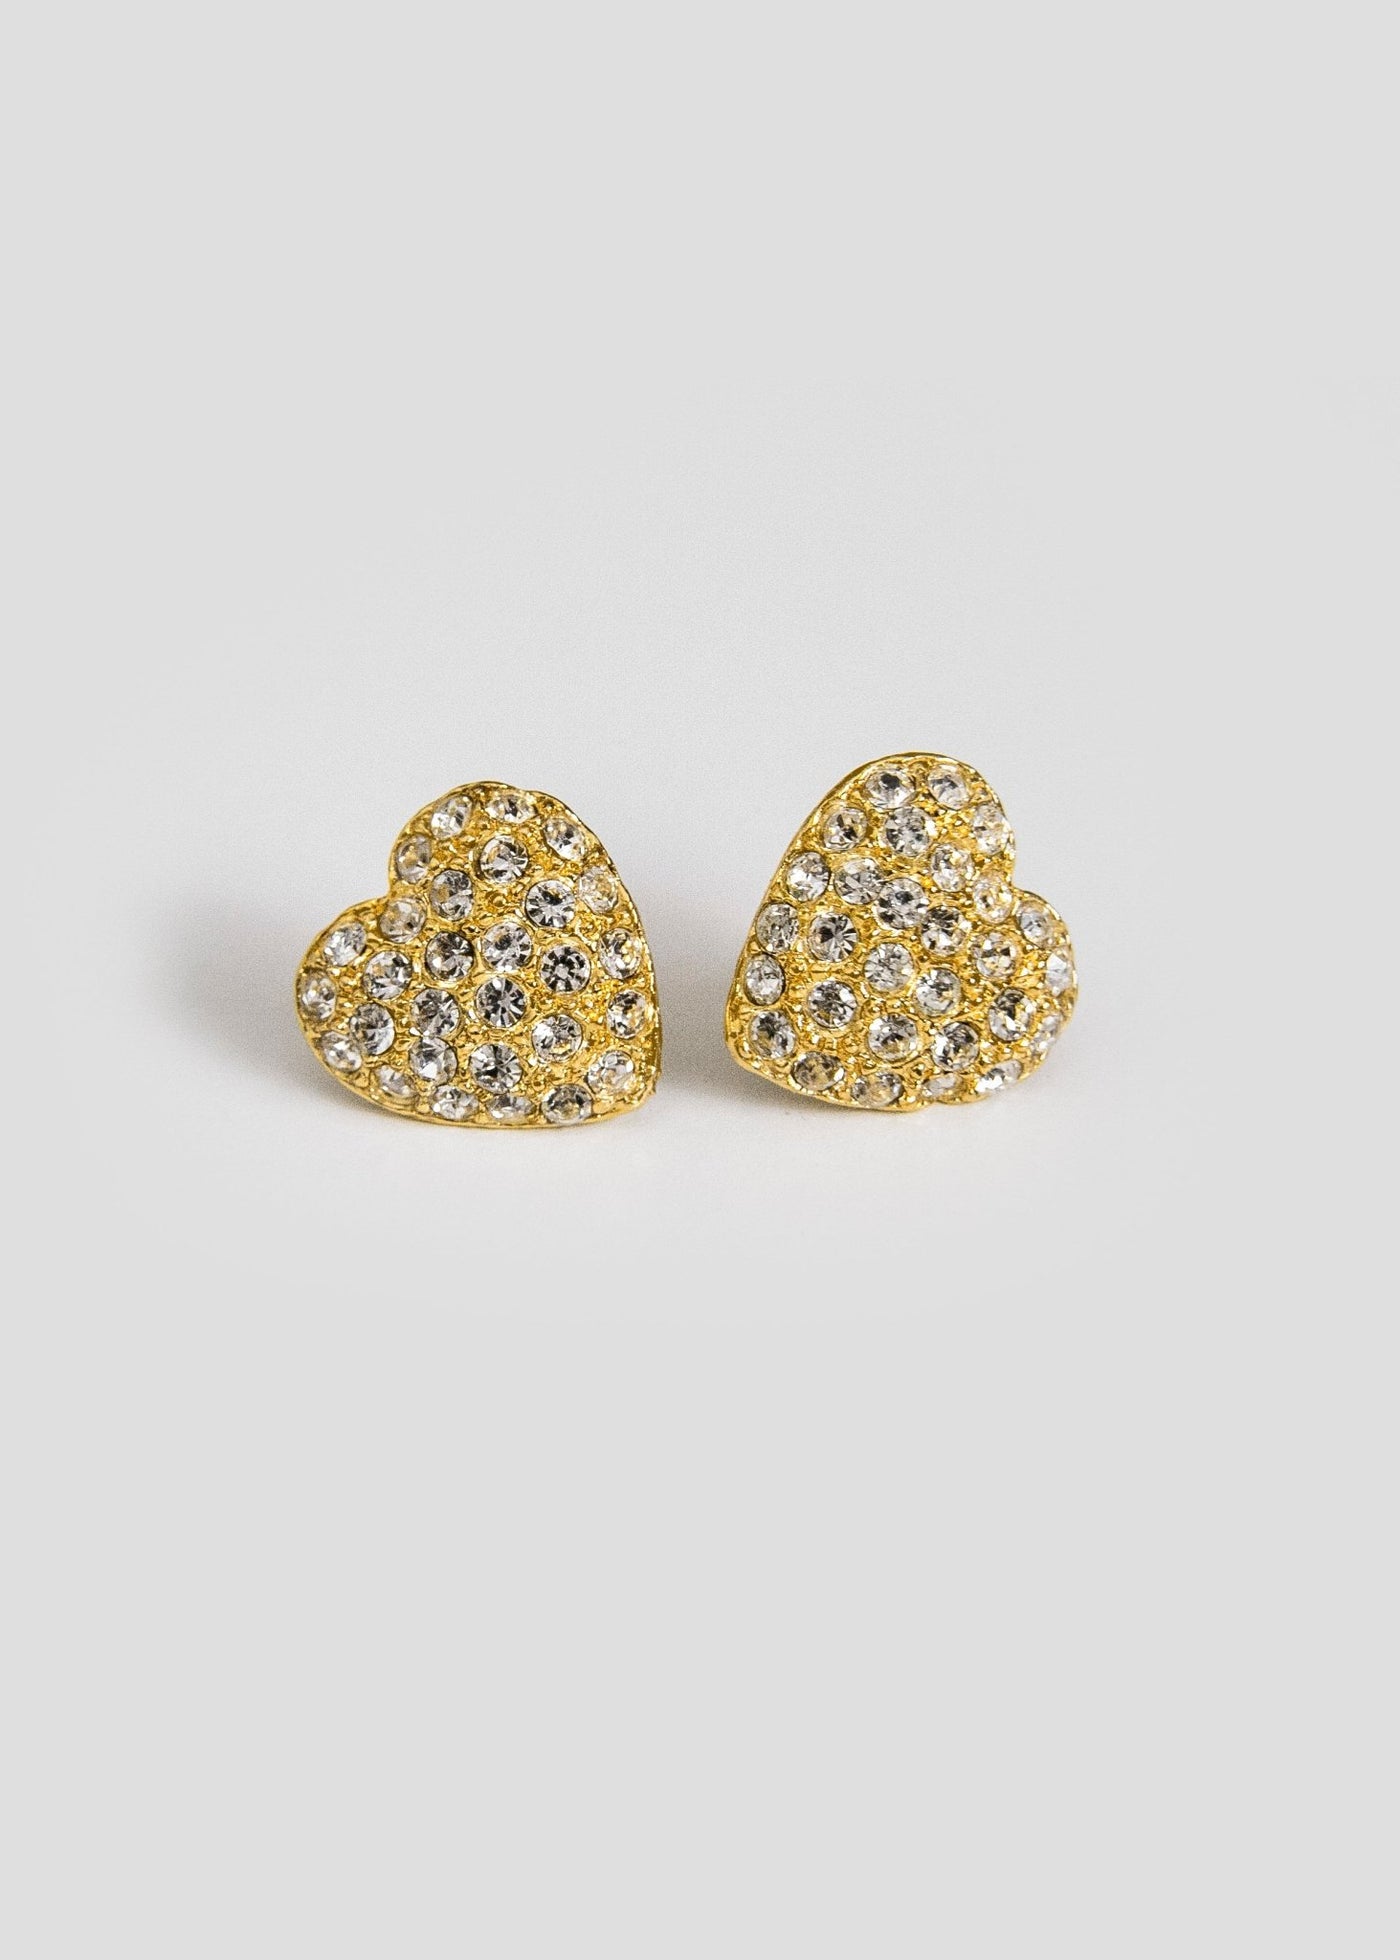 Crystal Encrusted Heart Studs - Maids to Measure